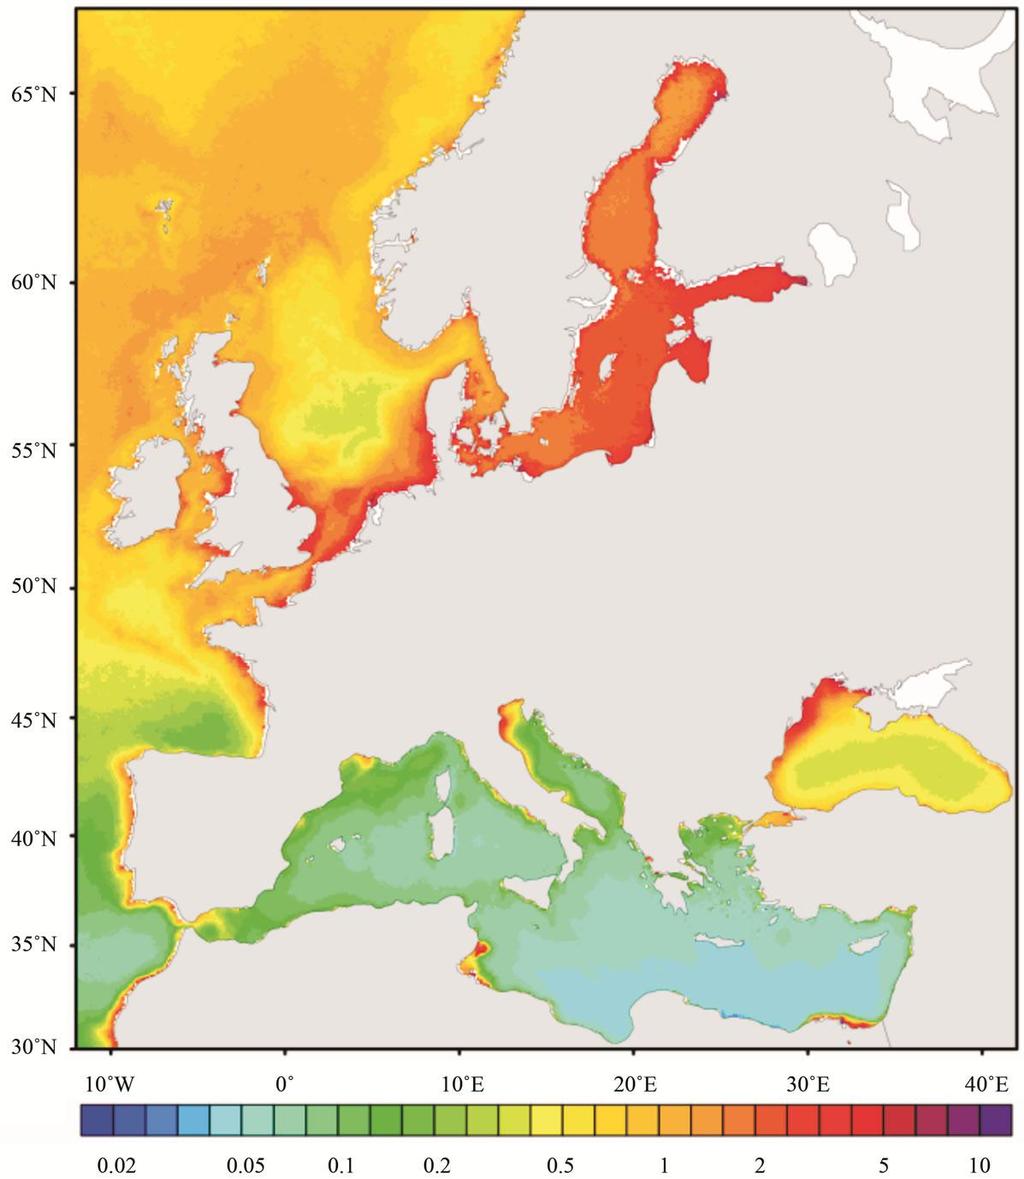 data Summer (May-Sept) chlorophyll a concentrations in European seas from